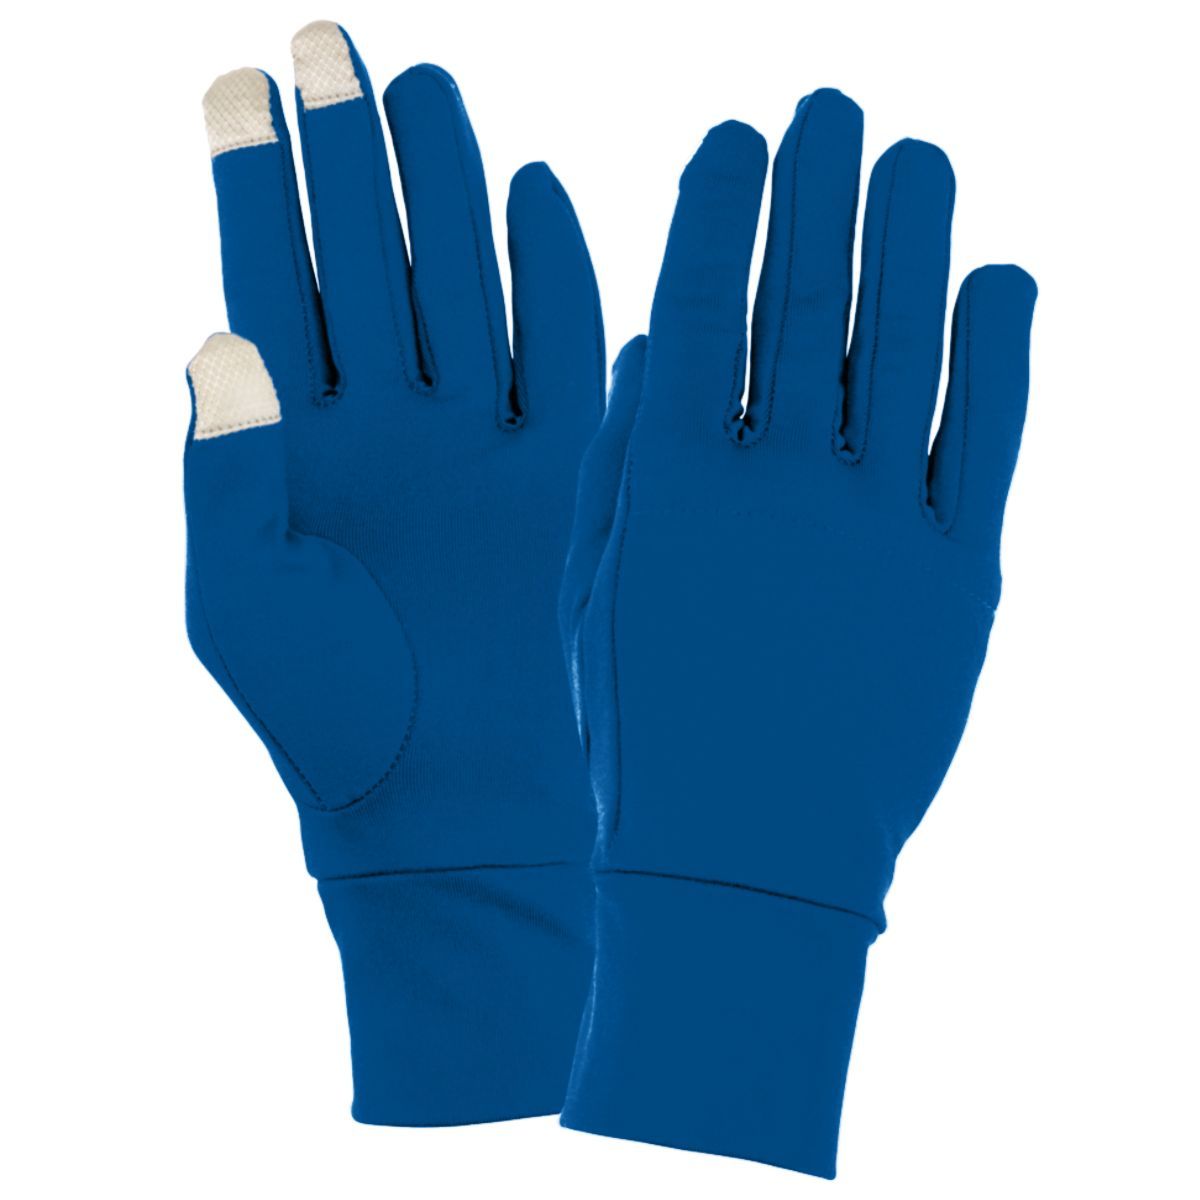 Augusta Sportswear Tech Gloves in Royal  -Part of the Accessories, Augusta-Products, Accessories-Gloves product lines at KanaleyCreations.com